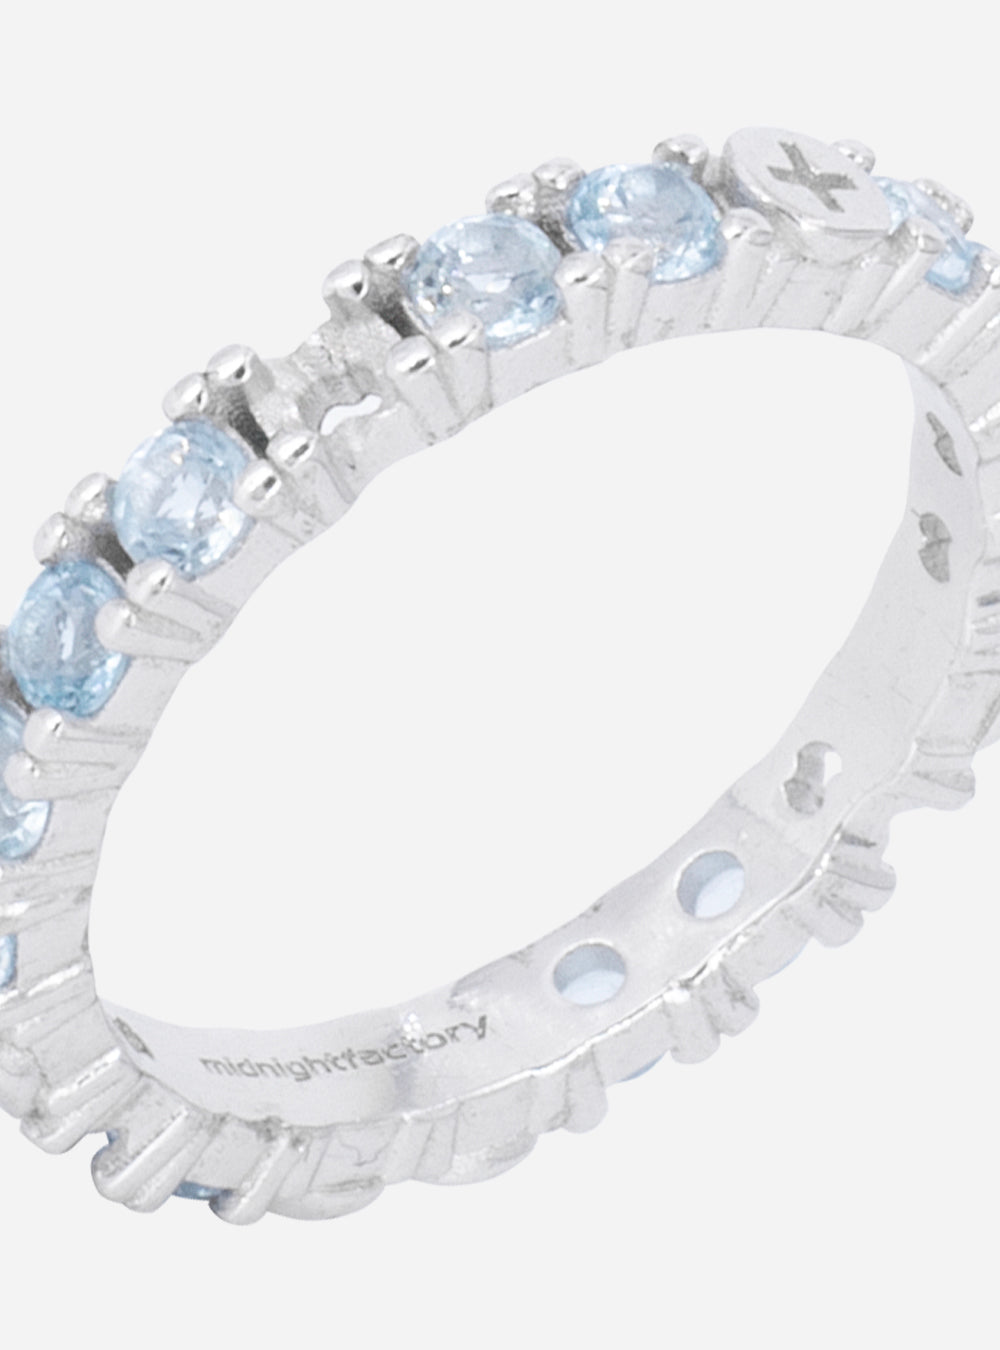 a Broken eternity ring with topaz stones by MIDNIGHTFACTORY.